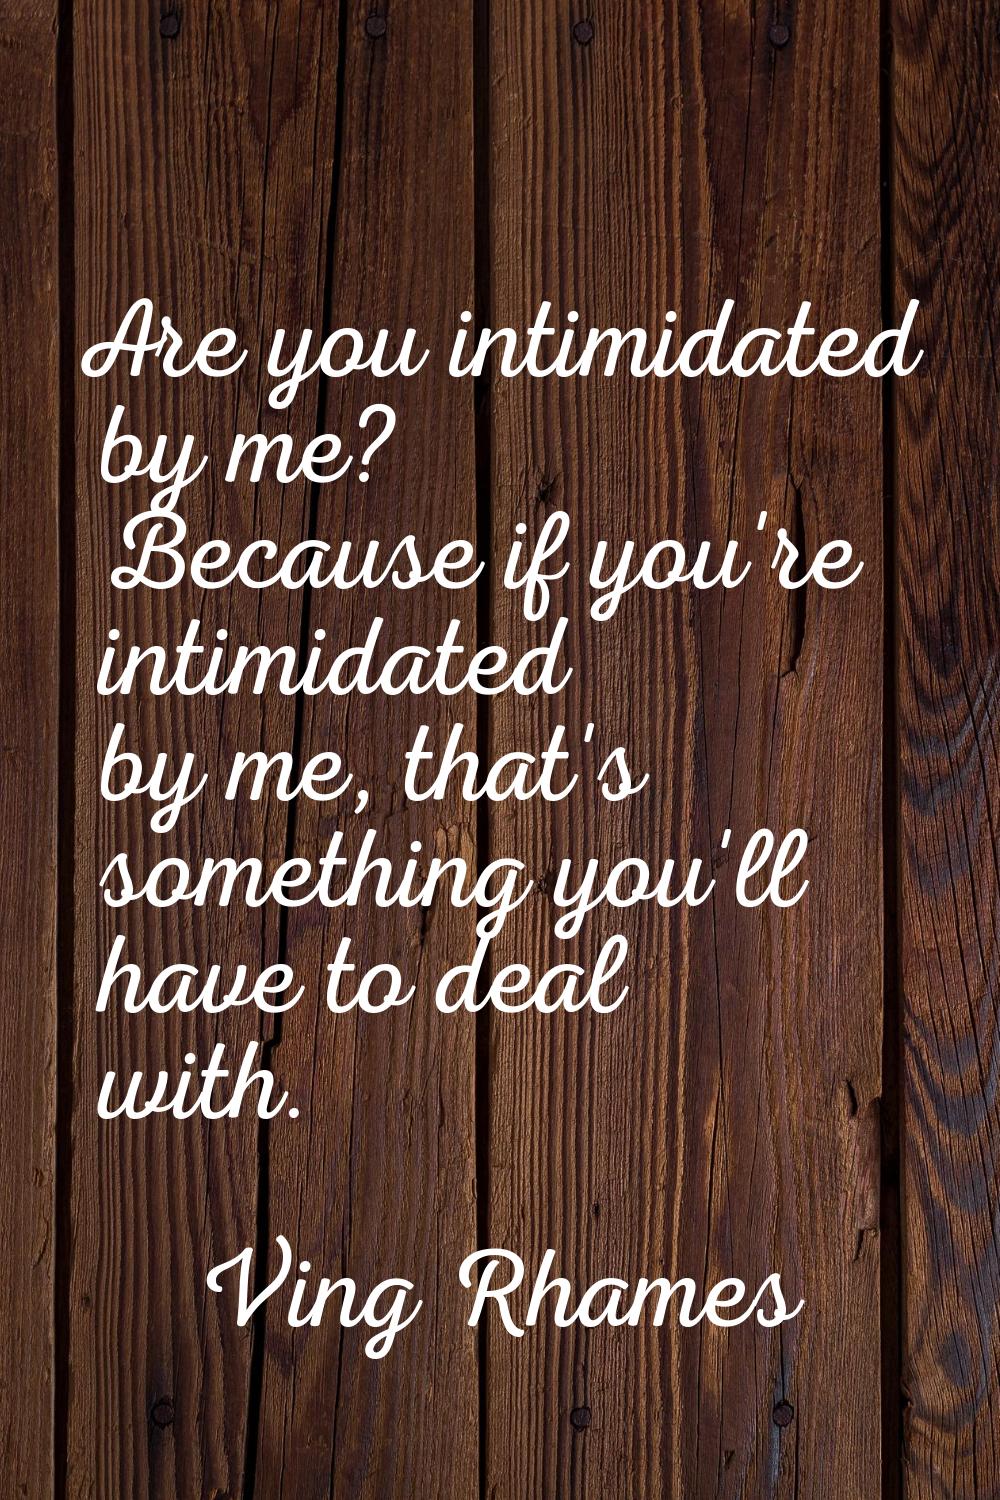 Are you intimidated by me? Because if you're intimidated by me, that's something you'll have to dea